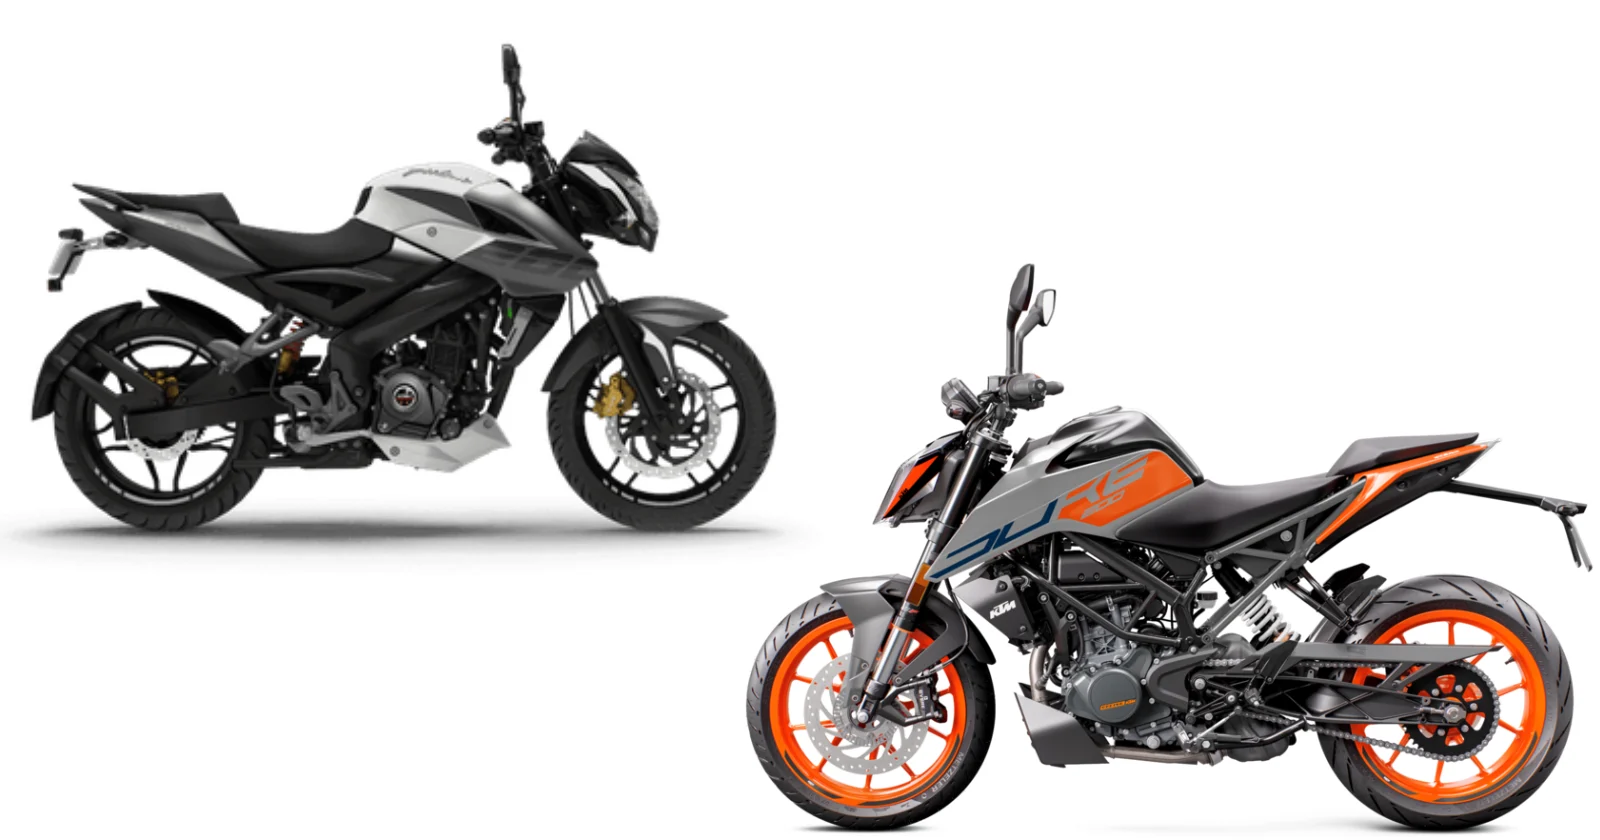 Bajaj Pulsar NS200 vs KTM Duke 200: Compare prices and Features